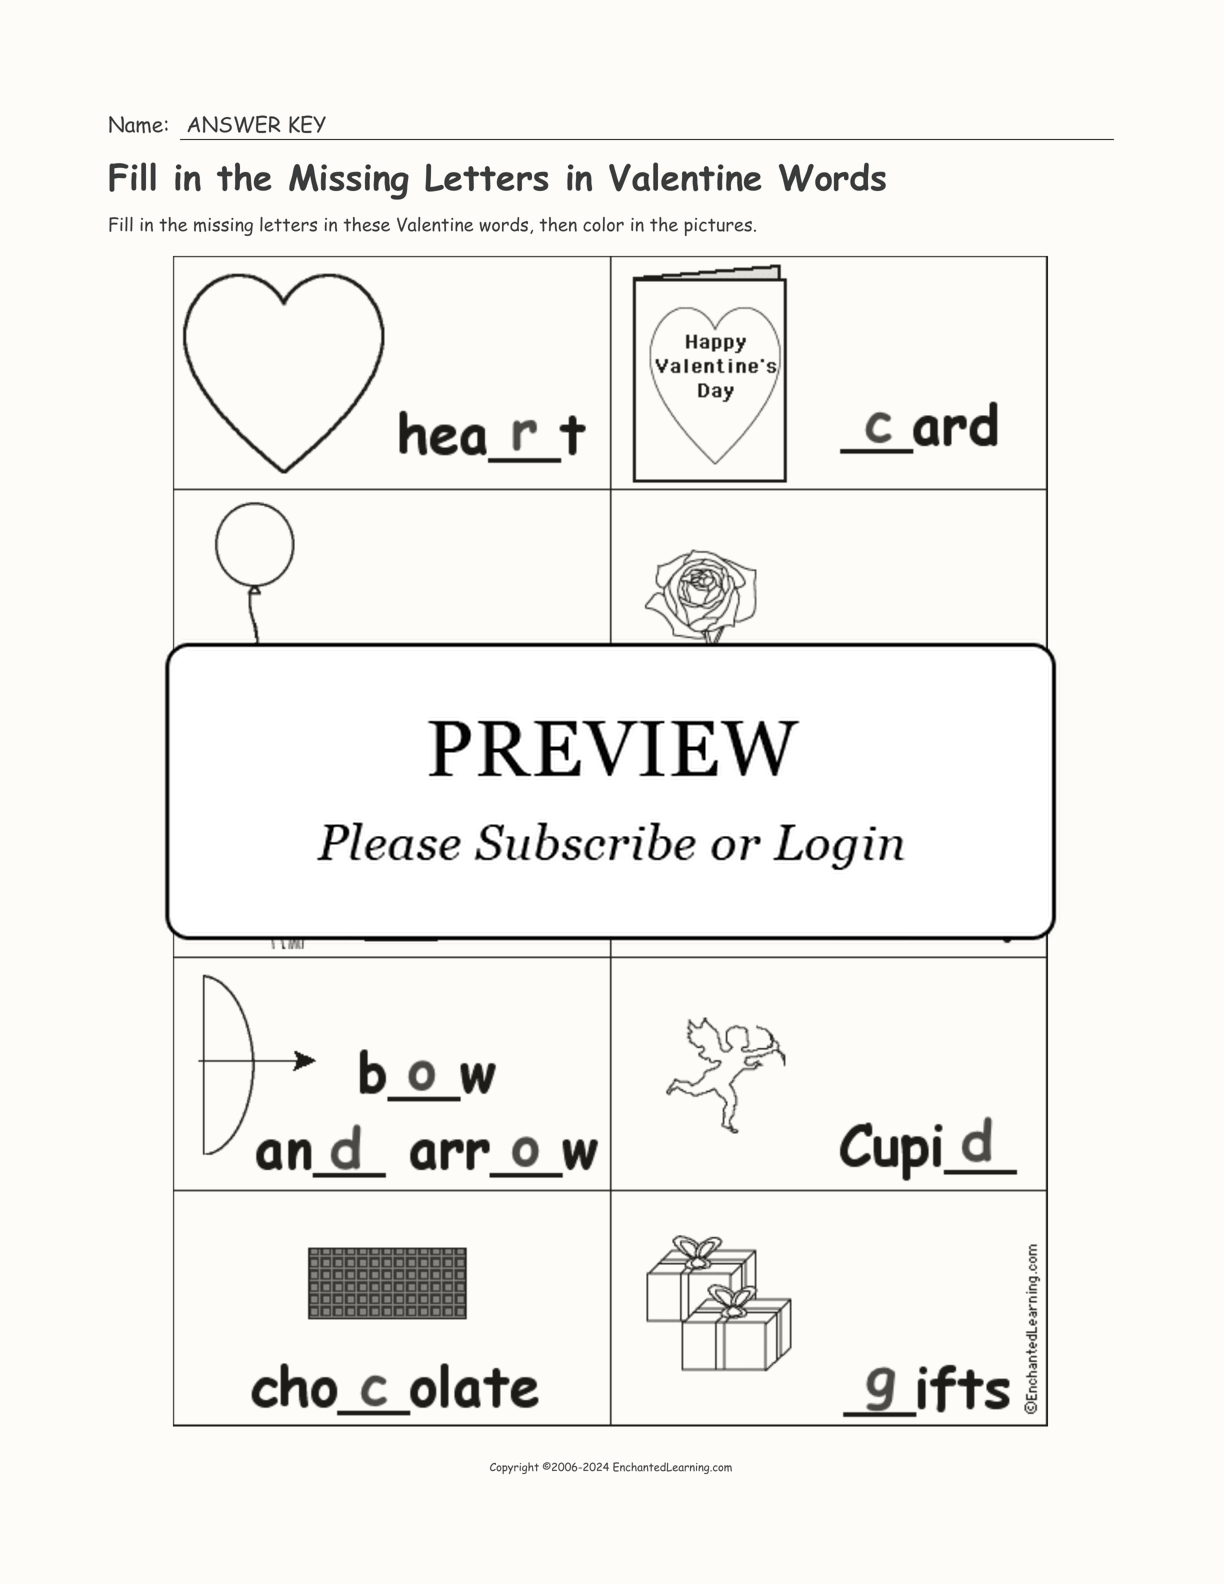 Fill in the Missing Letters in Valentine Words interactive worksheet page 2